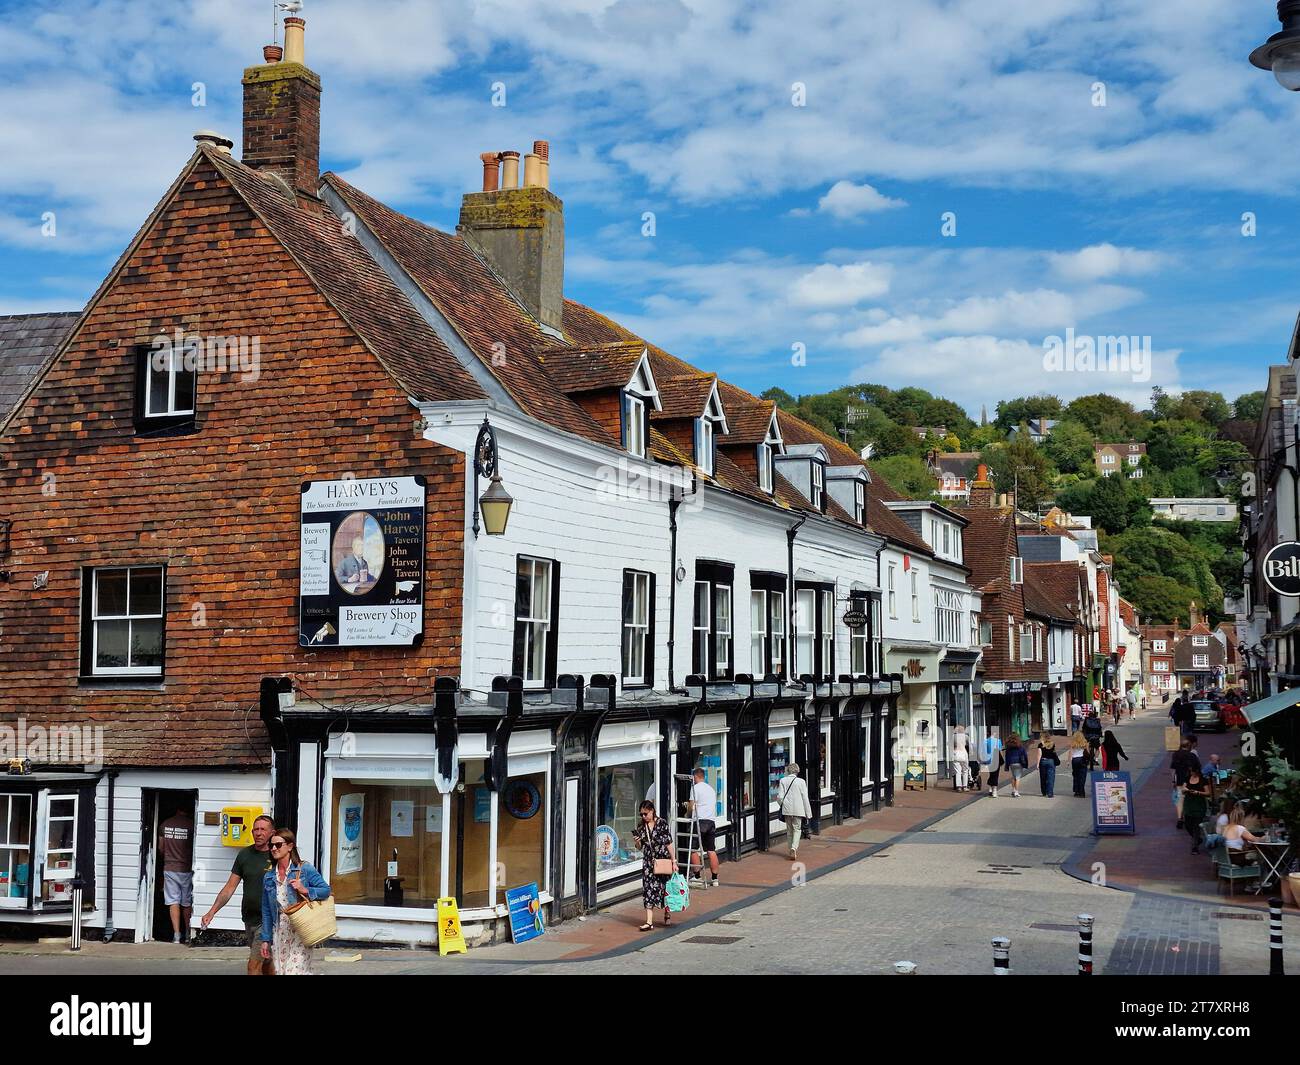 Cliffe High Street, Lewes, East Sussex, England, United Kingdom, Europe Stock Photo